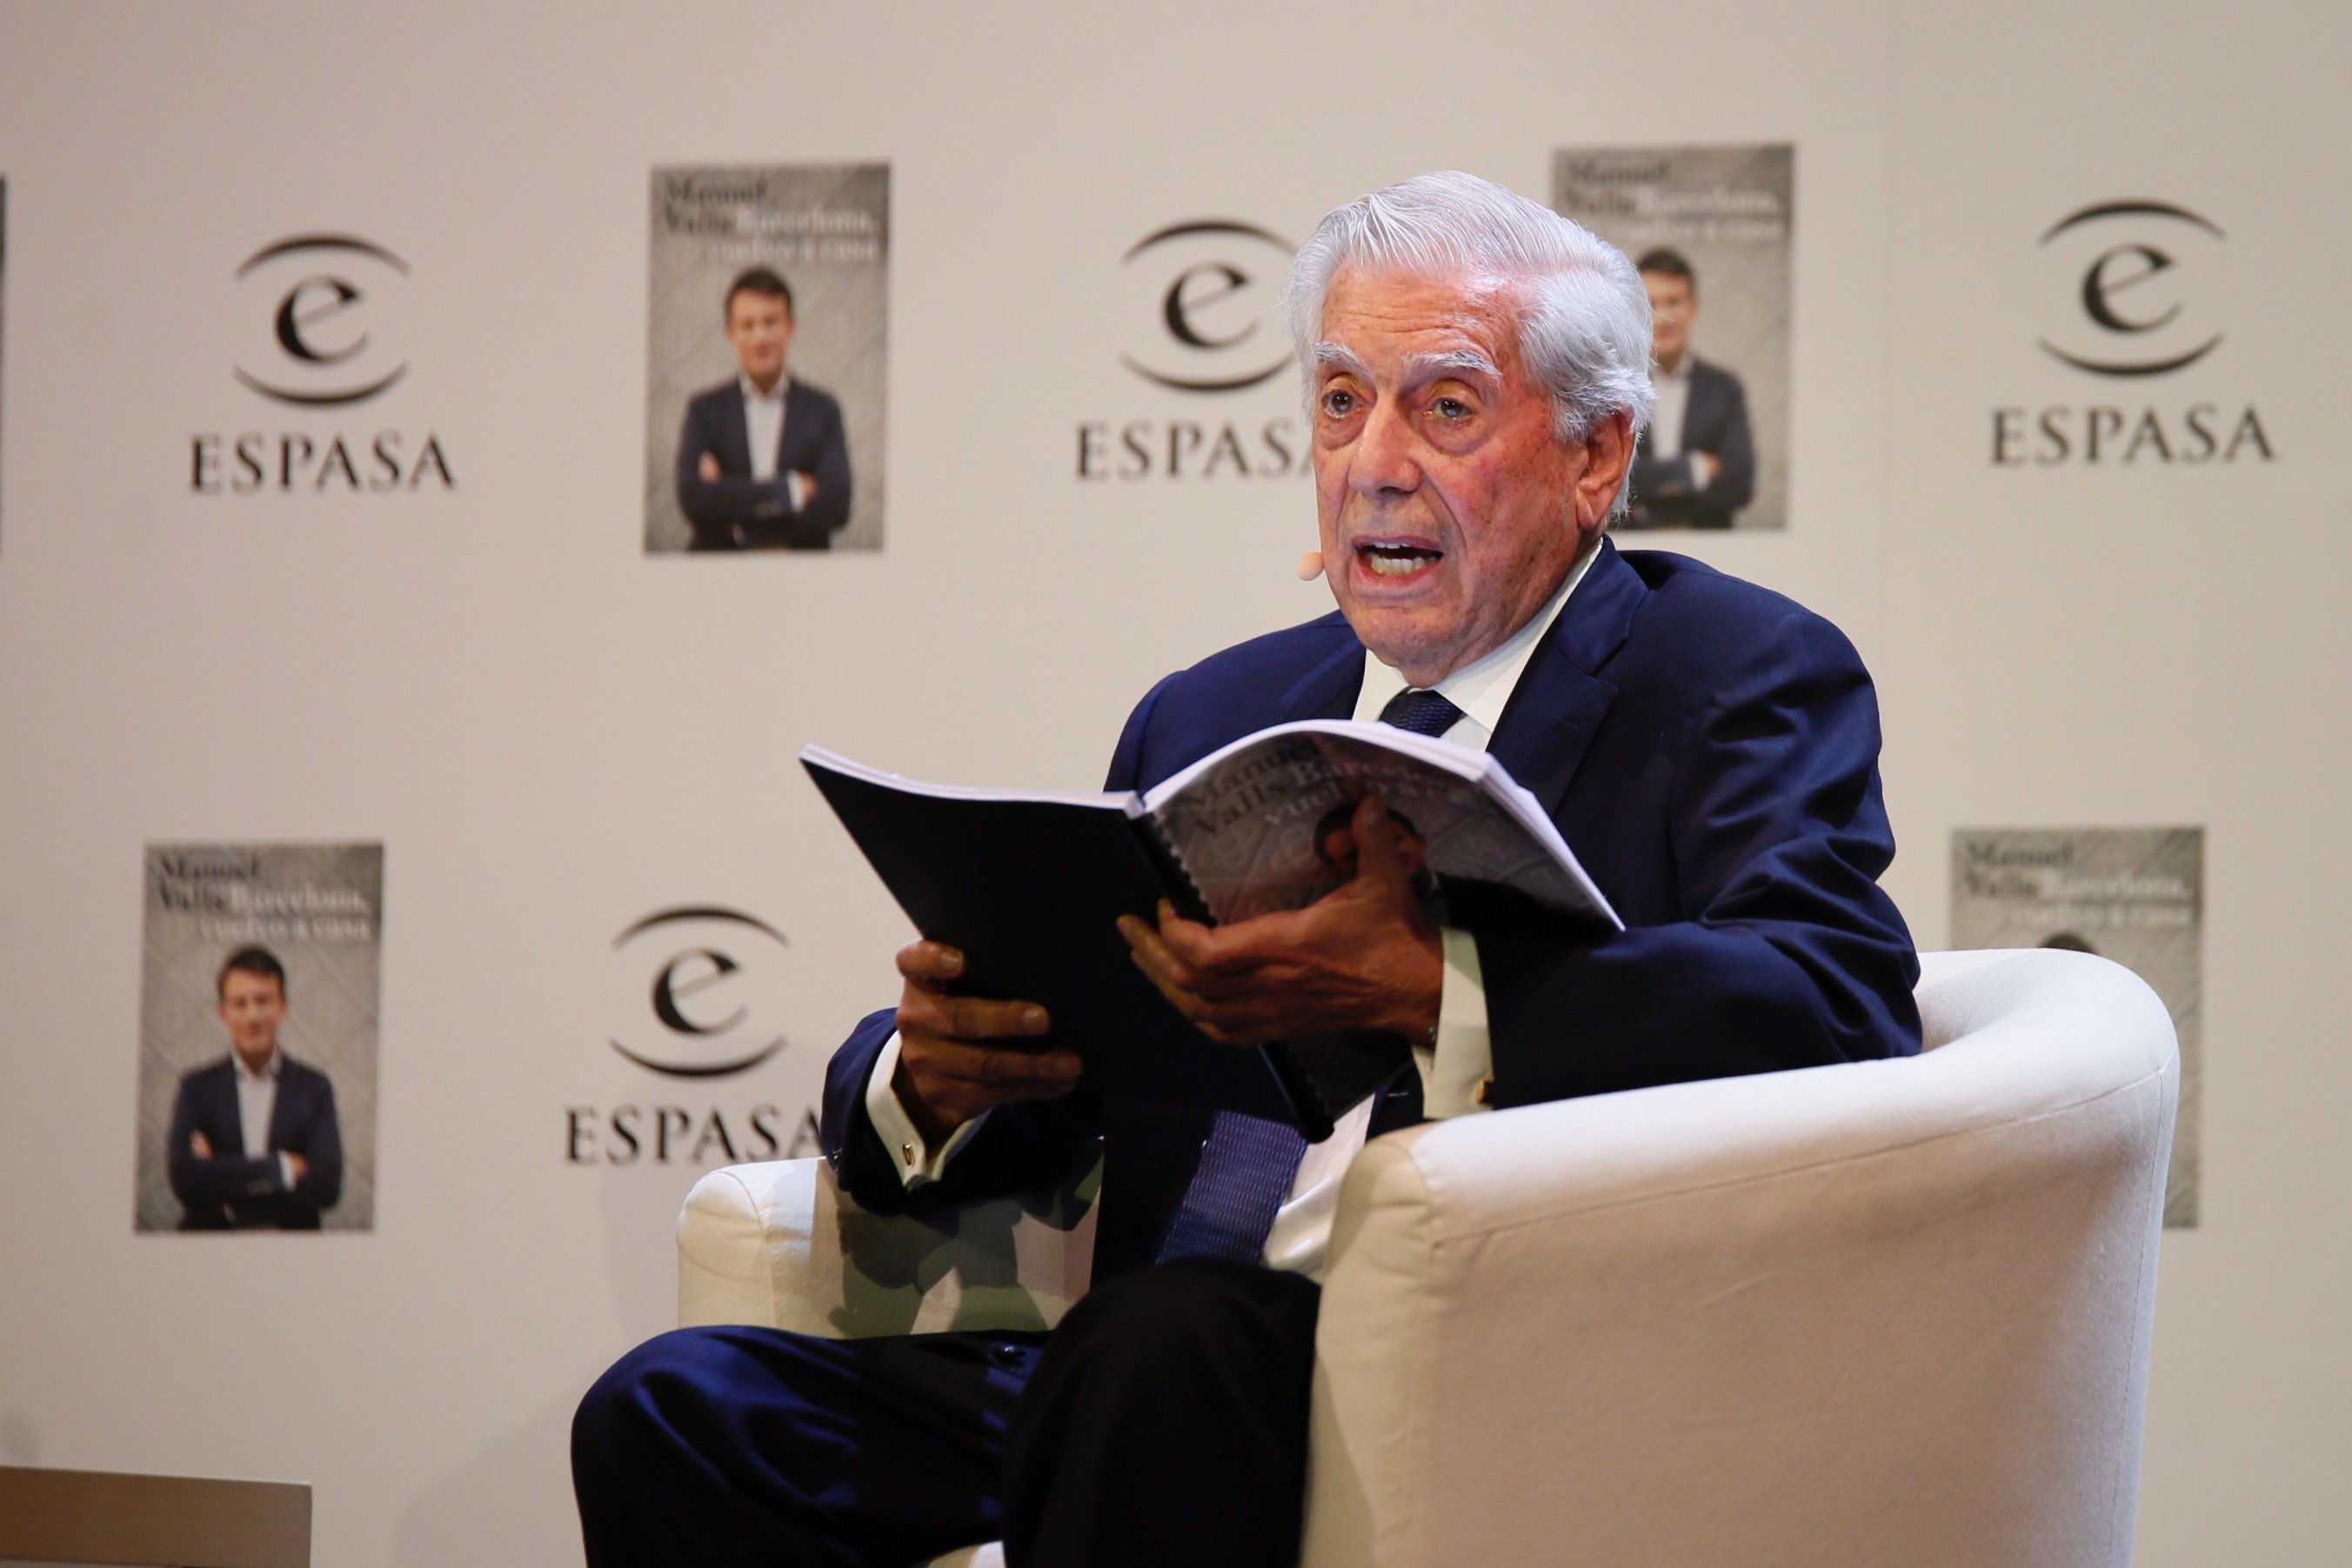 Vargas Llosa leaves PEN International over "pro-independence attempted coup d'état"